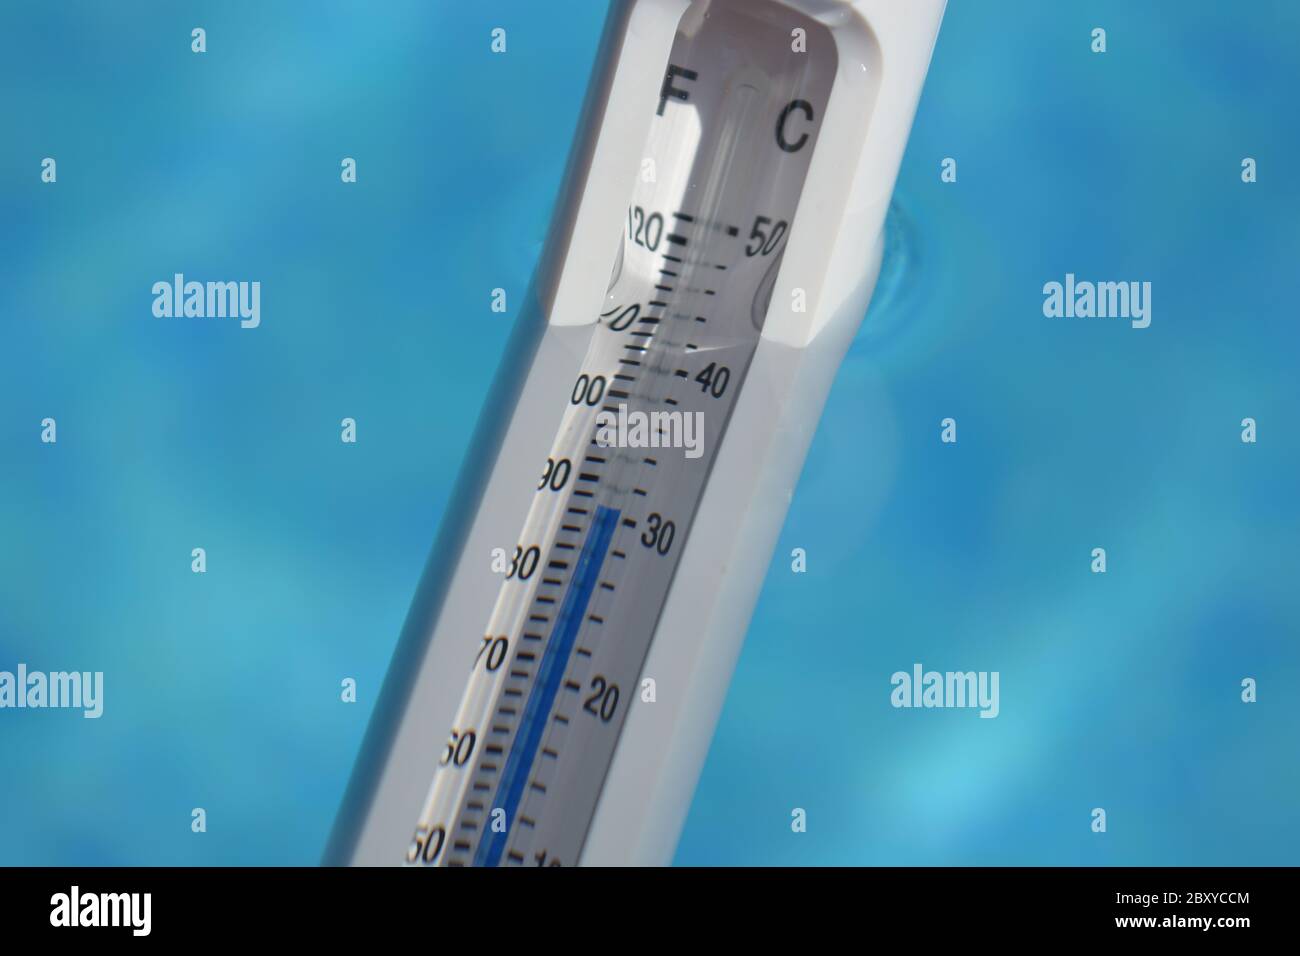 https://c8.alamy.com/comp/2BXYCCM/water-thermometer-reading-the-swimming-pool-temperature-at-30-celsius-2BXYCCM.jpg